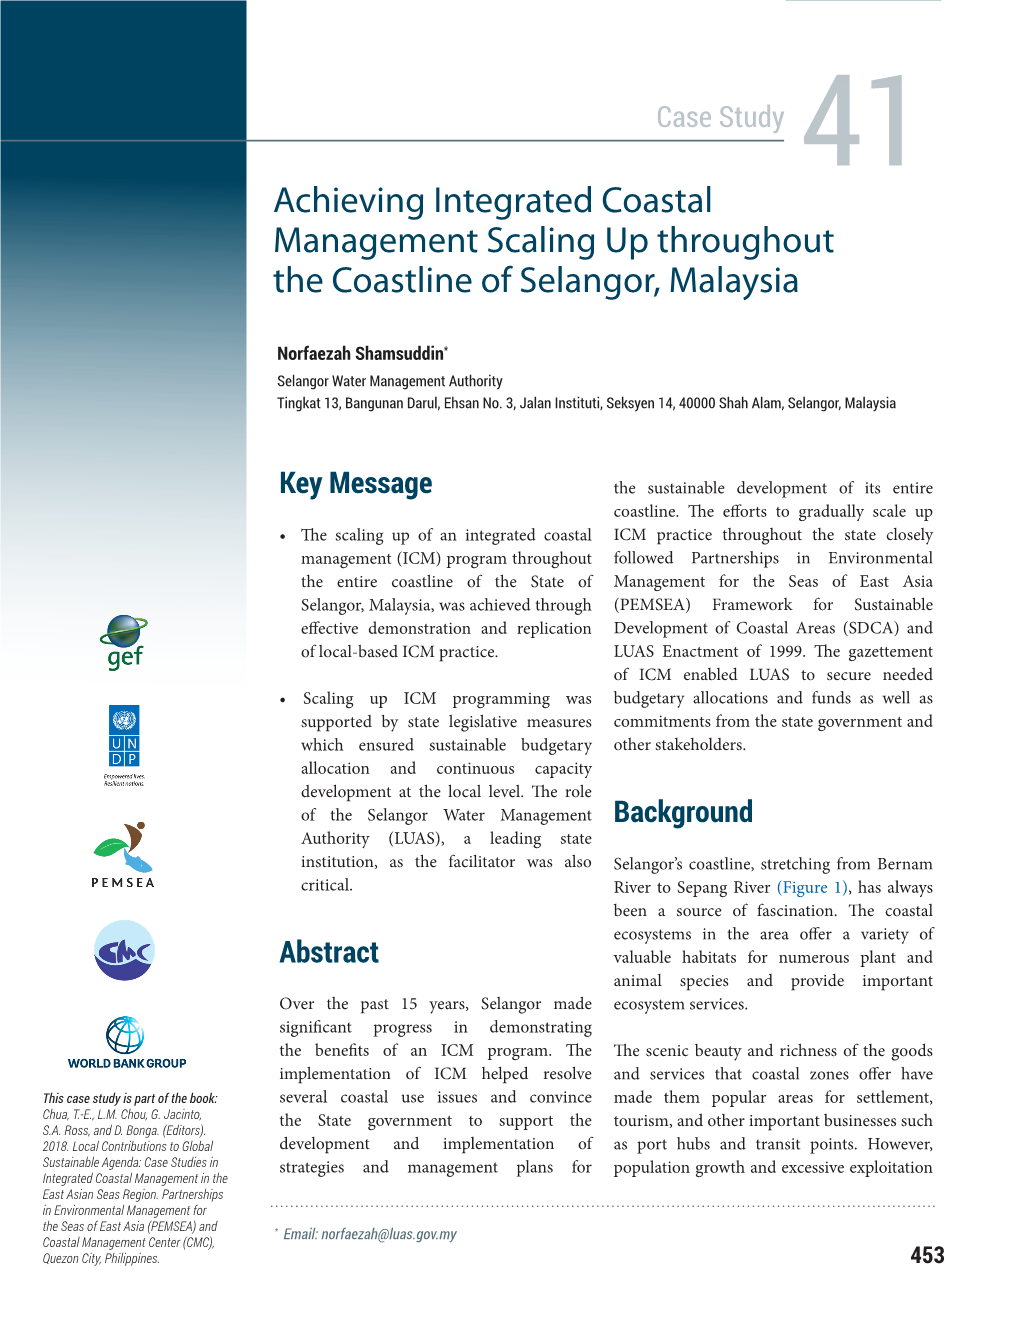 Achieving Integrated Coastal Management Scaling Up